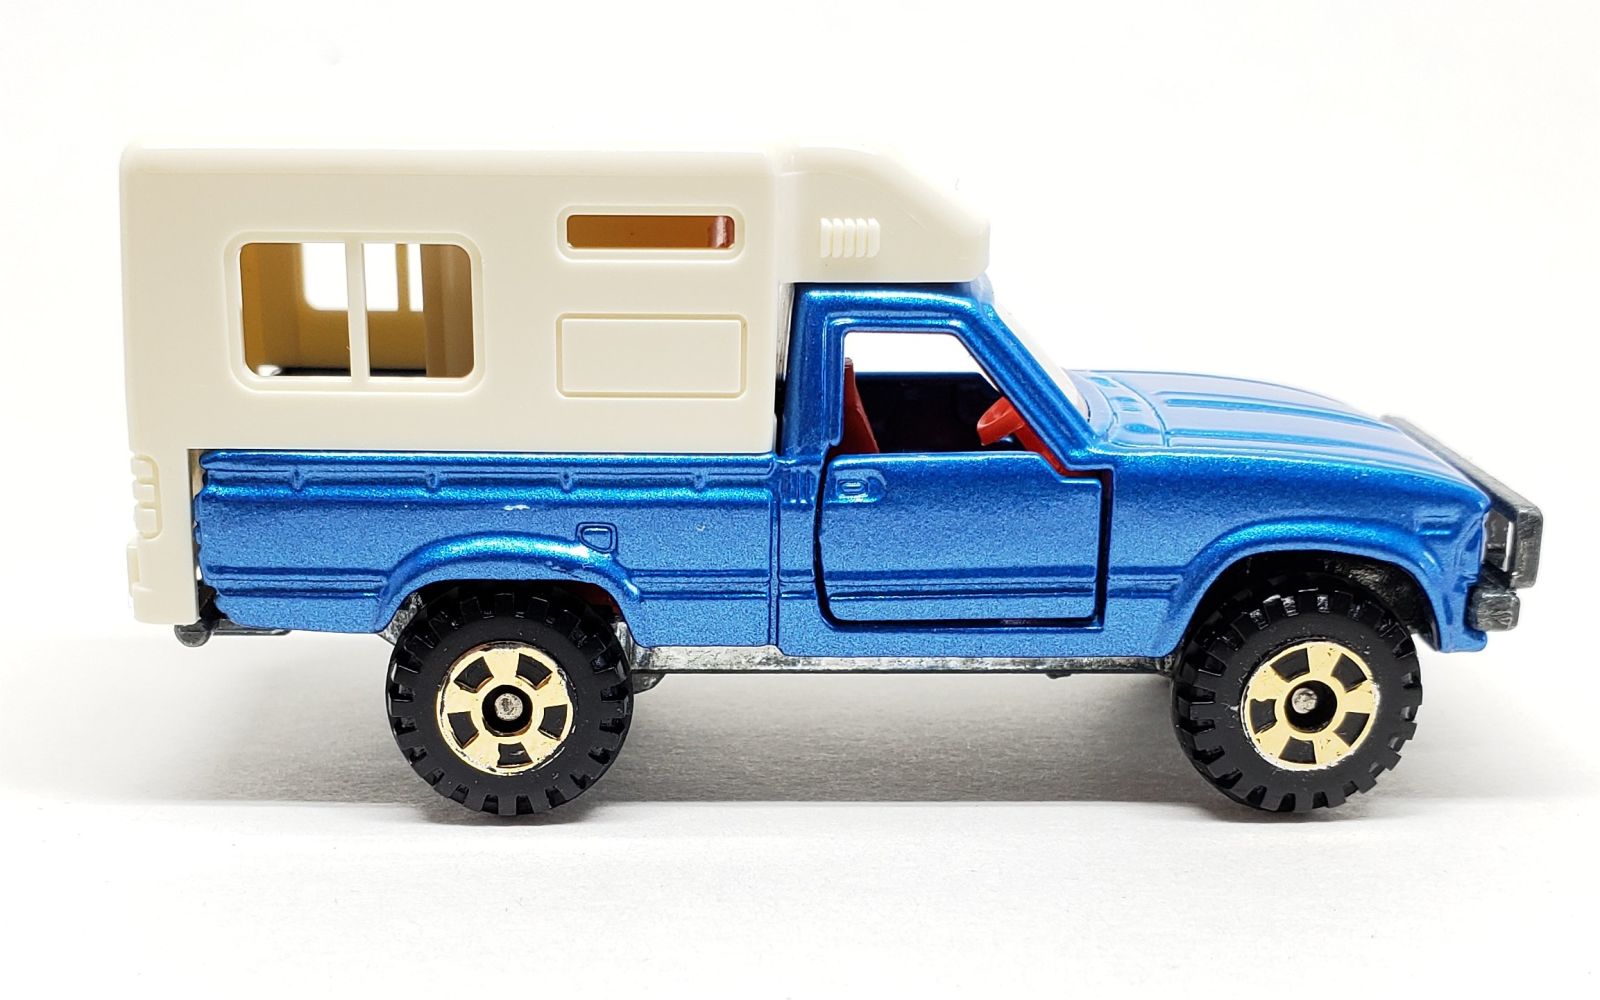 Illustration for article titled [REVIEW] Tomica Toyota Hilux Camping Car